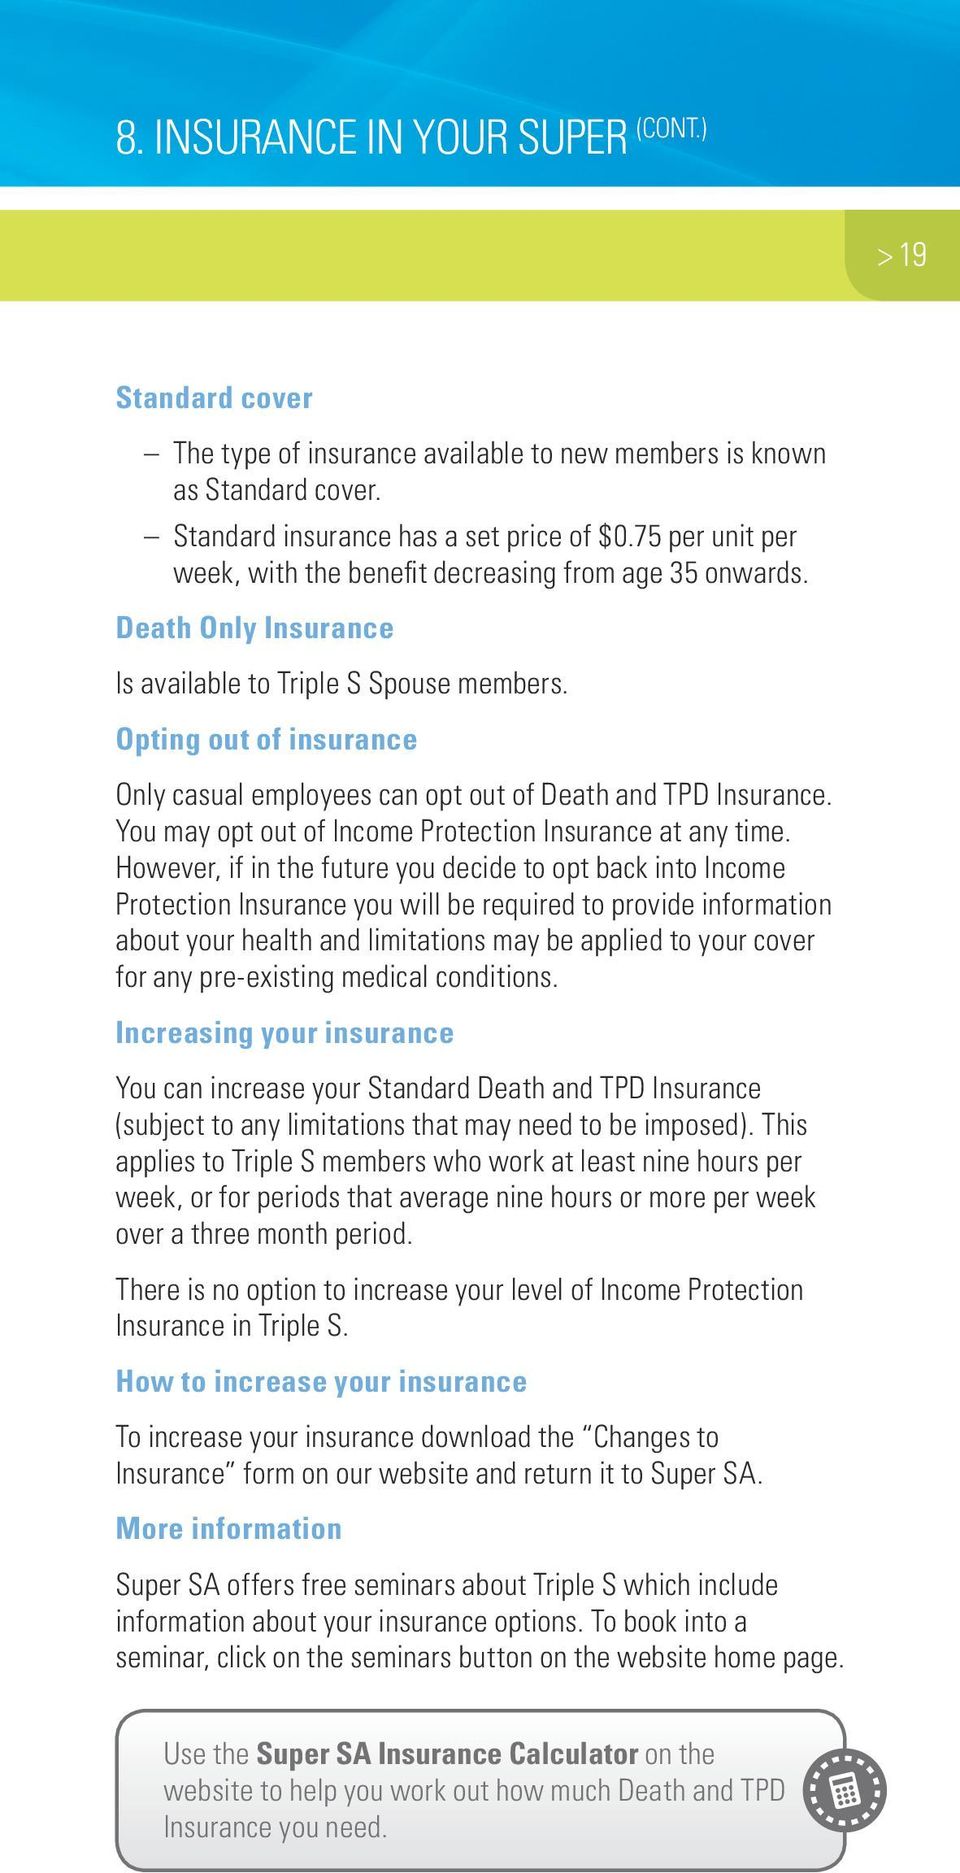 Opting out of insurance Only casual employees can opt out of Death and TPD Insurance. You may opt out of Income Protection Insurance at any time.